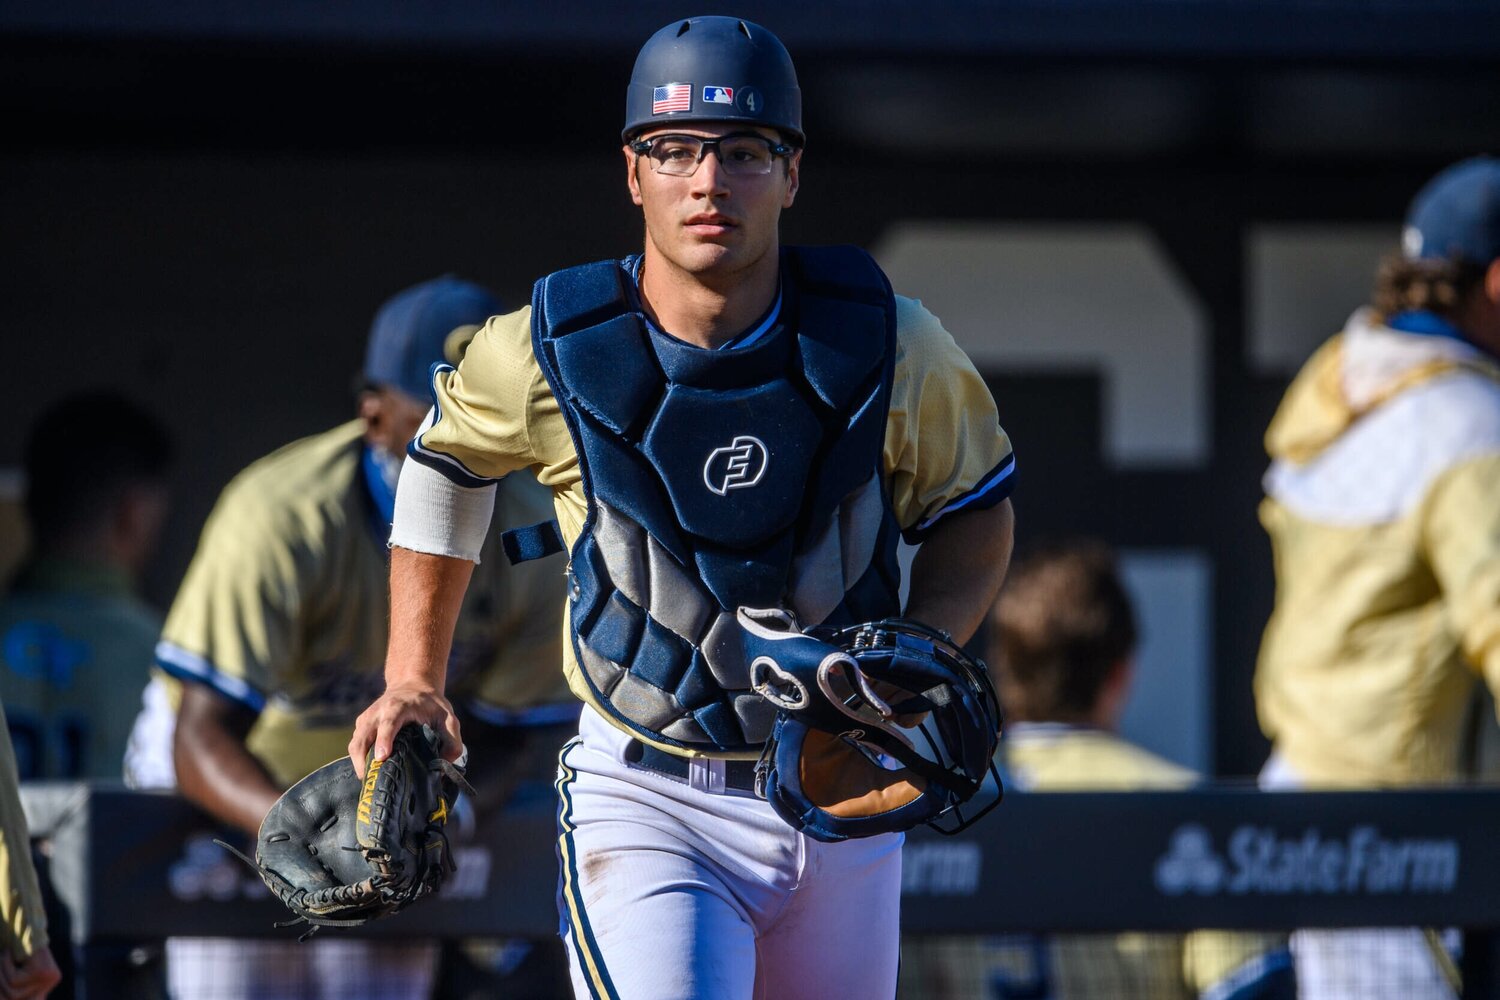 Ranking The 25 Best Uniforms In College Baseball — College Baseball, MLB  Draft, Prospects - Baseball America